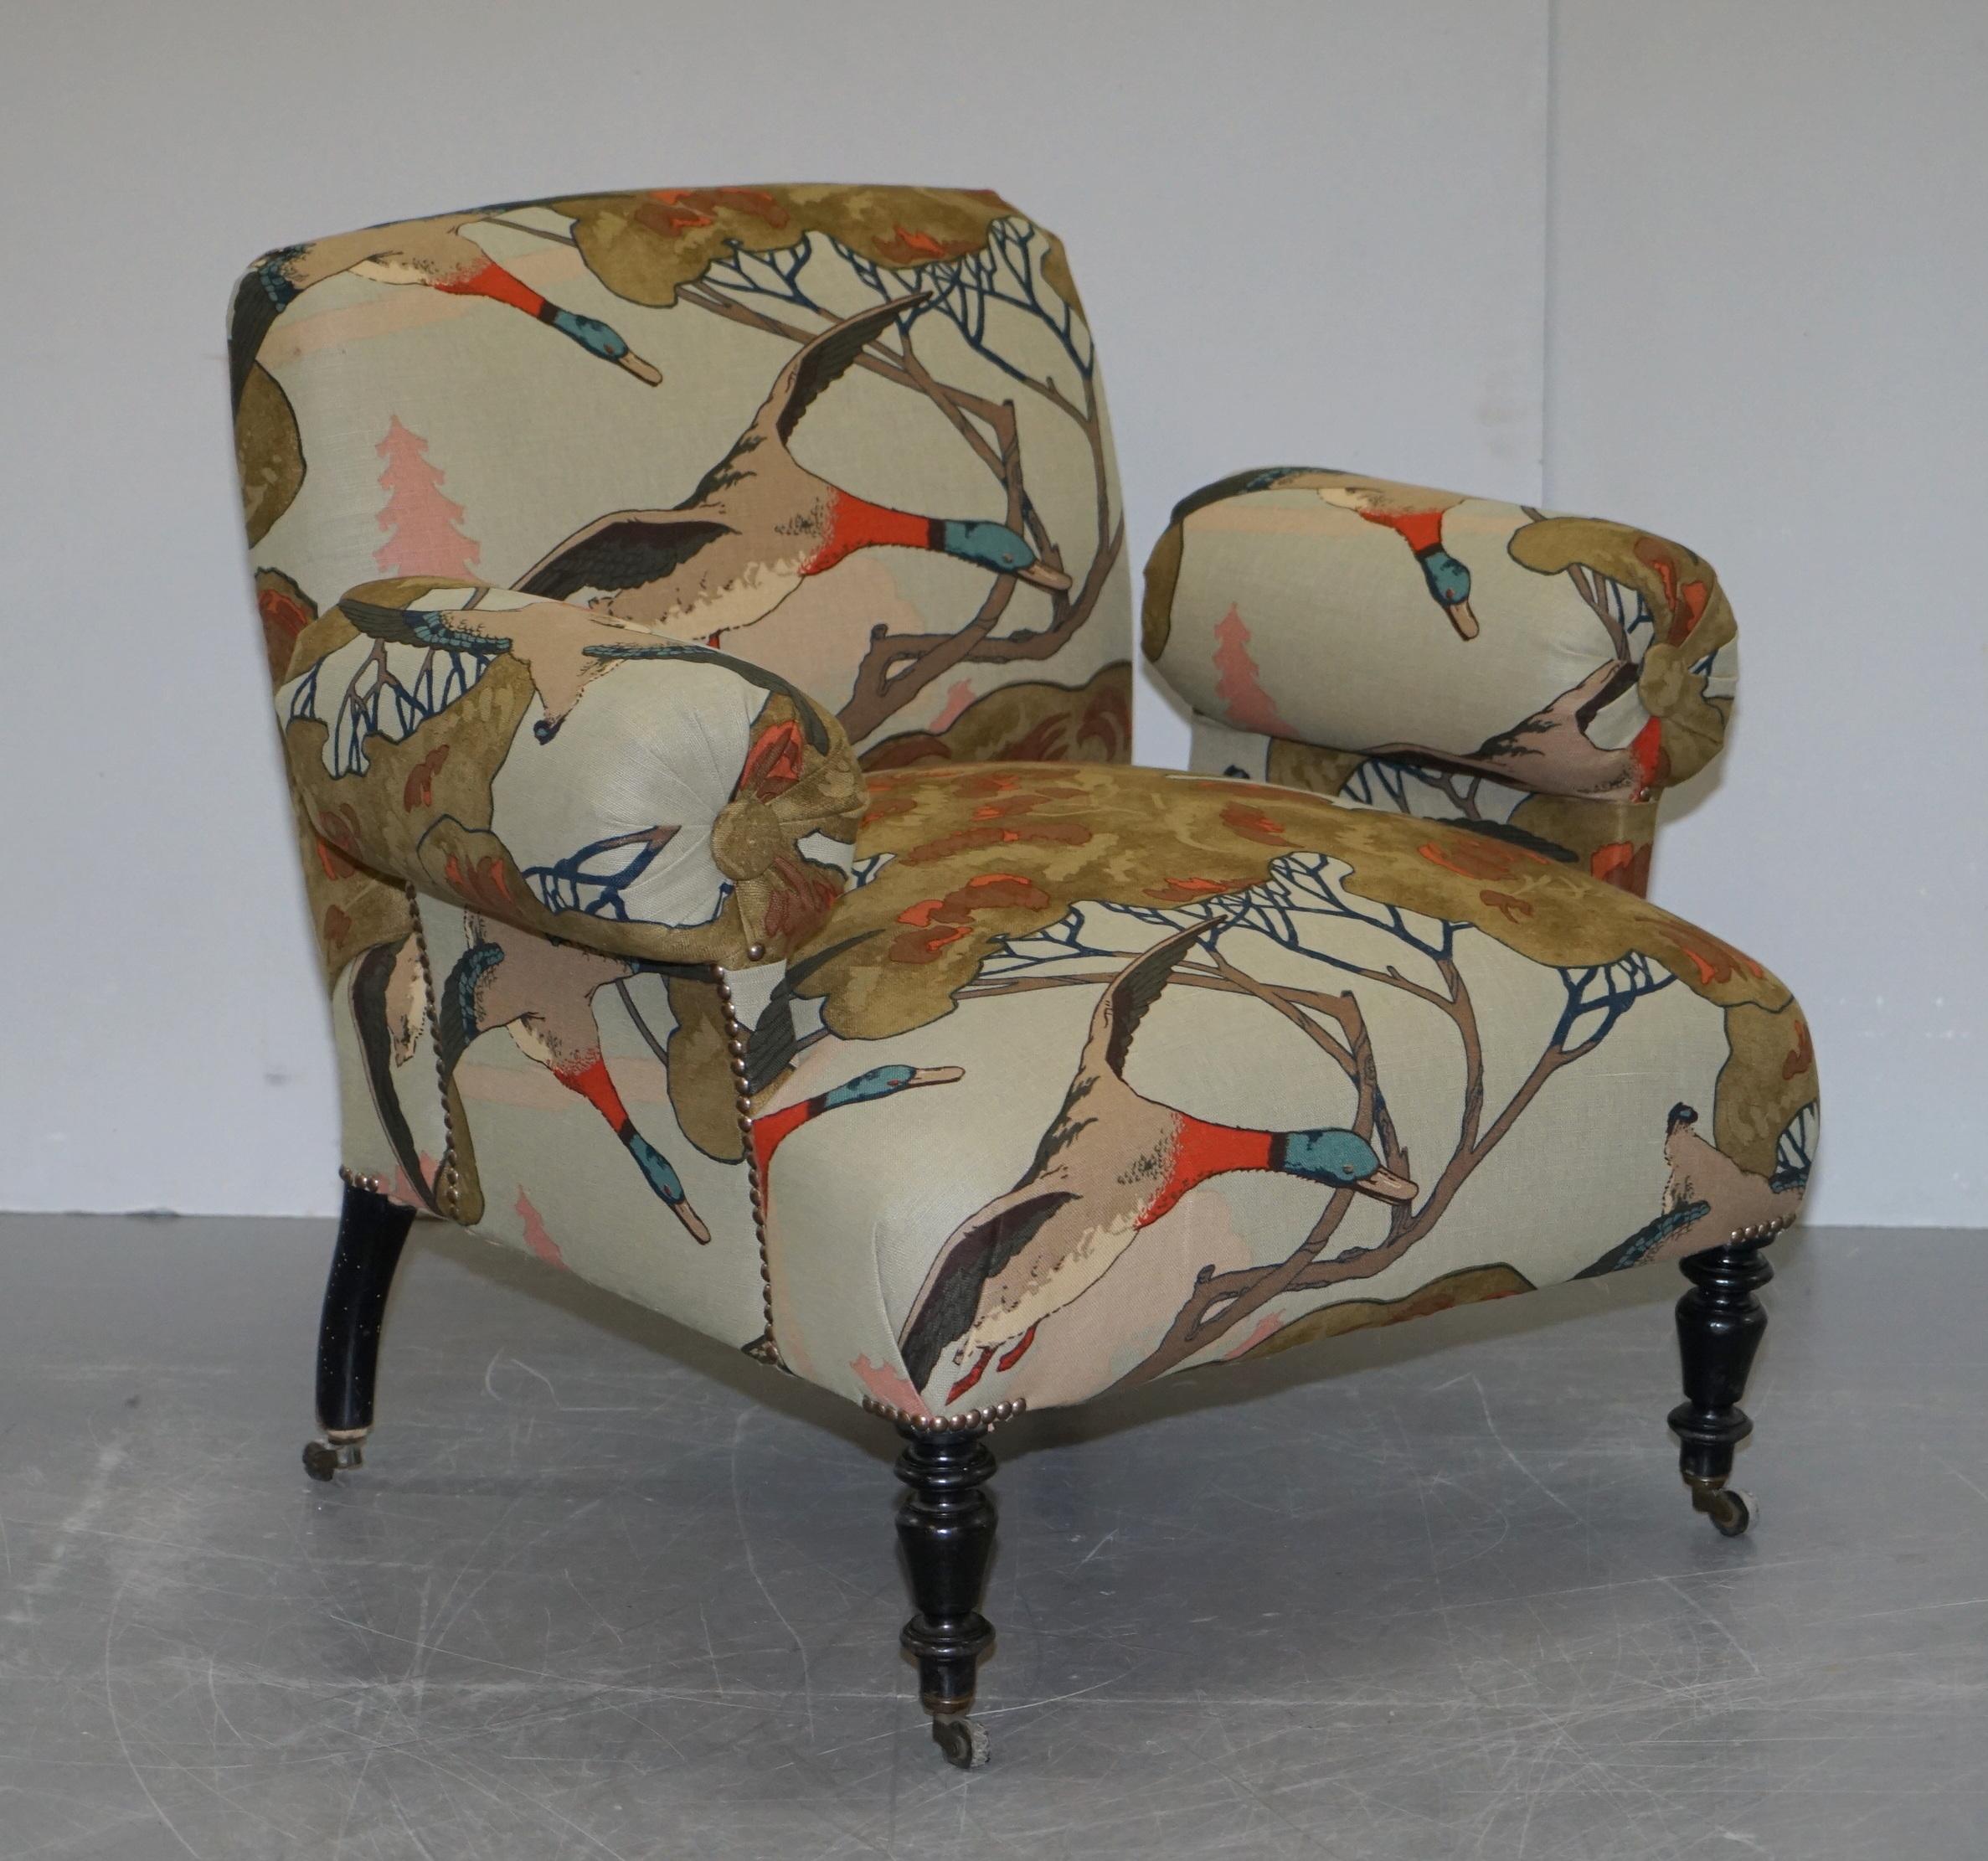 We are delighted to offer this absolutely exquisite fully restored circa 1810 Regency library armchair newly upholstered with Mulberry Flying ducks fabric

A very good looking well made and decorative antique armchair. It is approximately 210